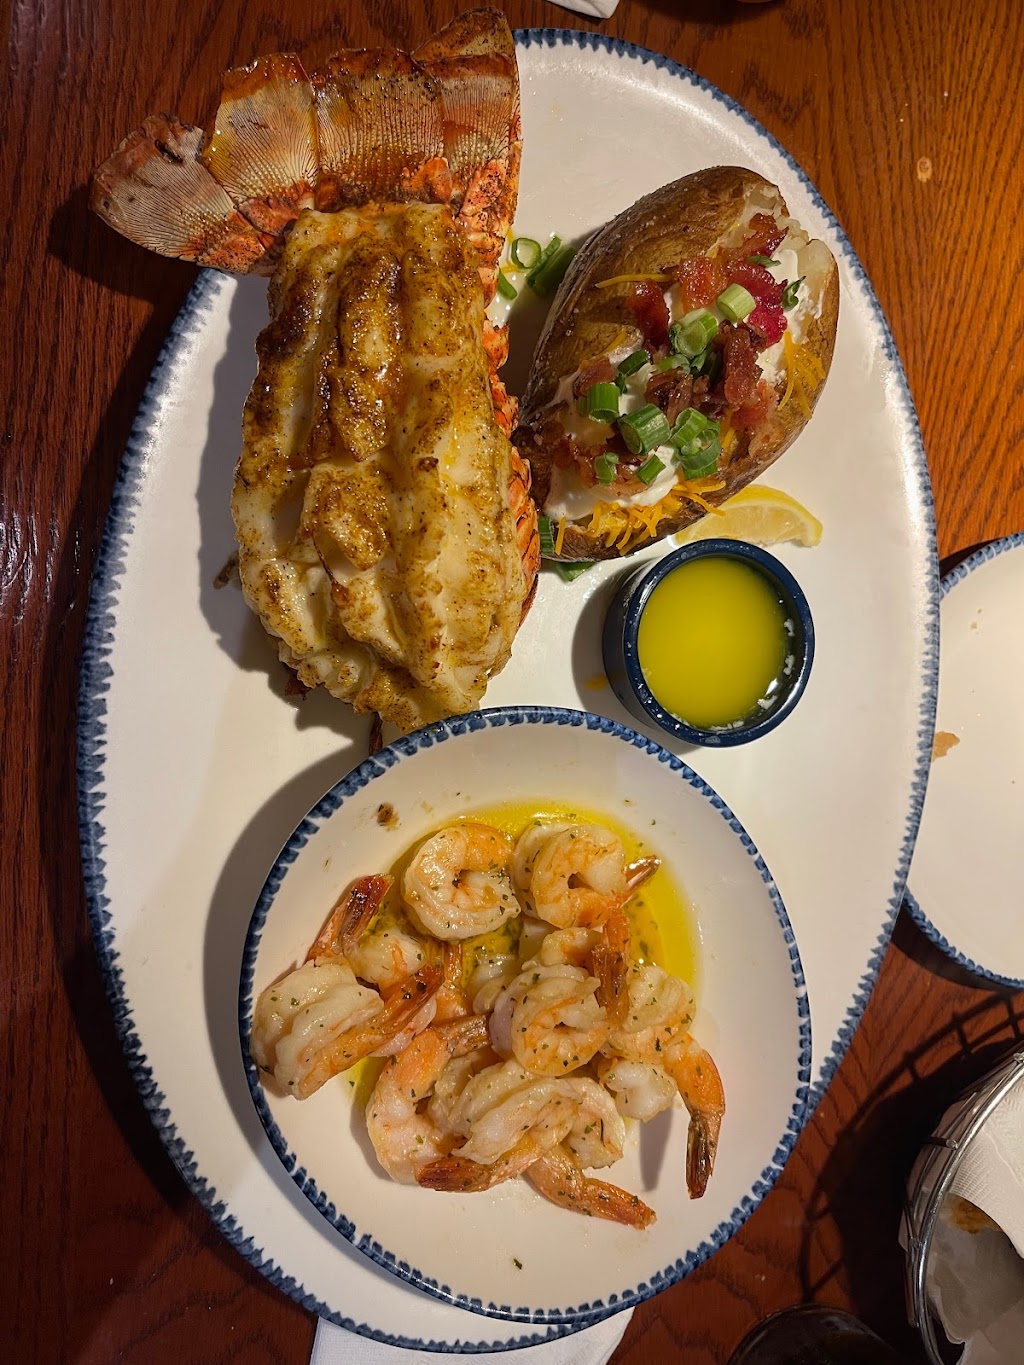 Red Lobster | MIDWAY SHOPPING CENTER, 999 Central Park Ave, Scarsdale, NY 10583 | Phone: (914) 472-6373